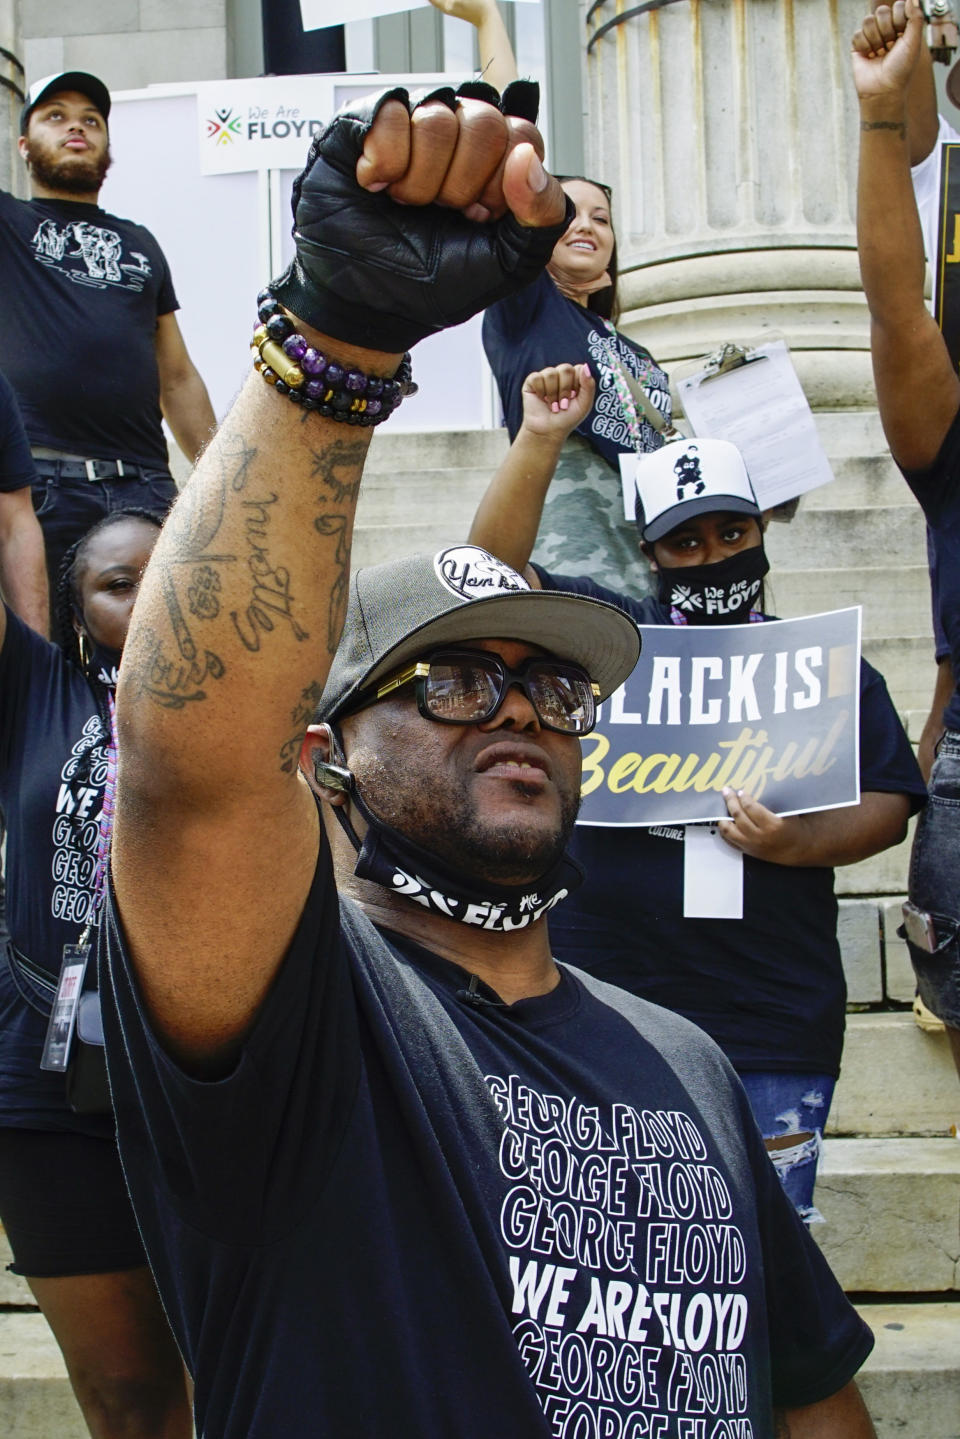 Terrence Floyd, brother of George Floyd, raises his fist with others during a rally on Sunday, May 23, 2021, in Brooklyn borough of New York. George Floyd, whose May 25, 2020 death in Minneapolis was captured on video, plead for air as he was pinned under the knee of former officer Derek Chauvin, who was convicted of murder and manslaughter in April 2021. (AP Photo/Eduardo Munoz Alvarez)